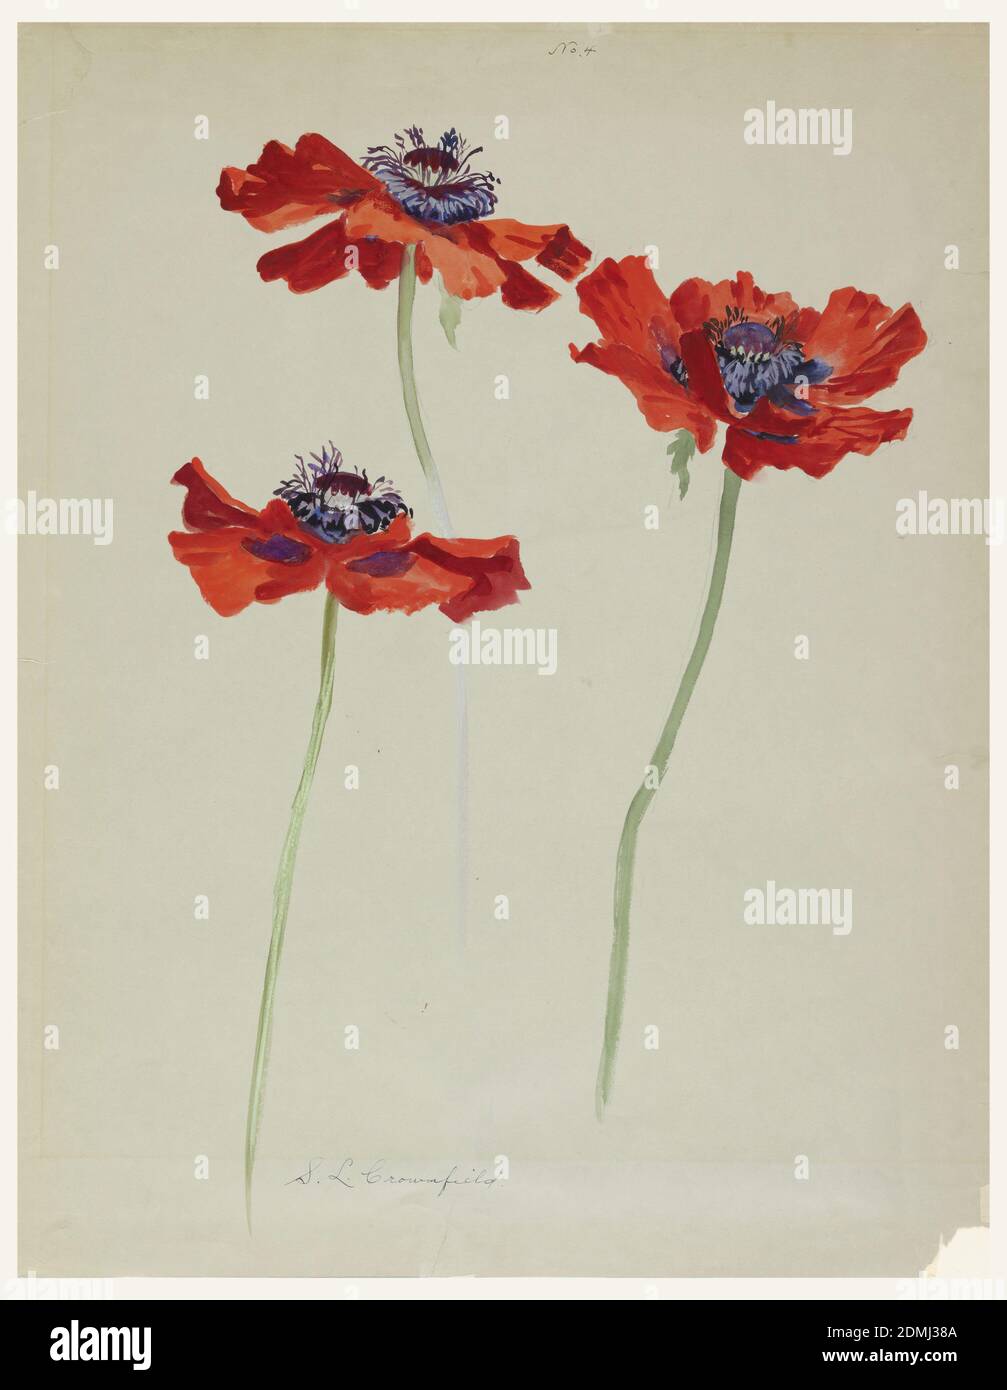 Three Studies of Poppies, Sophia L. Crownfield, (American, 1862–1929), Brush and gouache on gray paper, Studies of three poppies on long green stems. Flowers have dark red petals and purple centers., USA, early 20th century, nature studies, Drawing Stock Photo